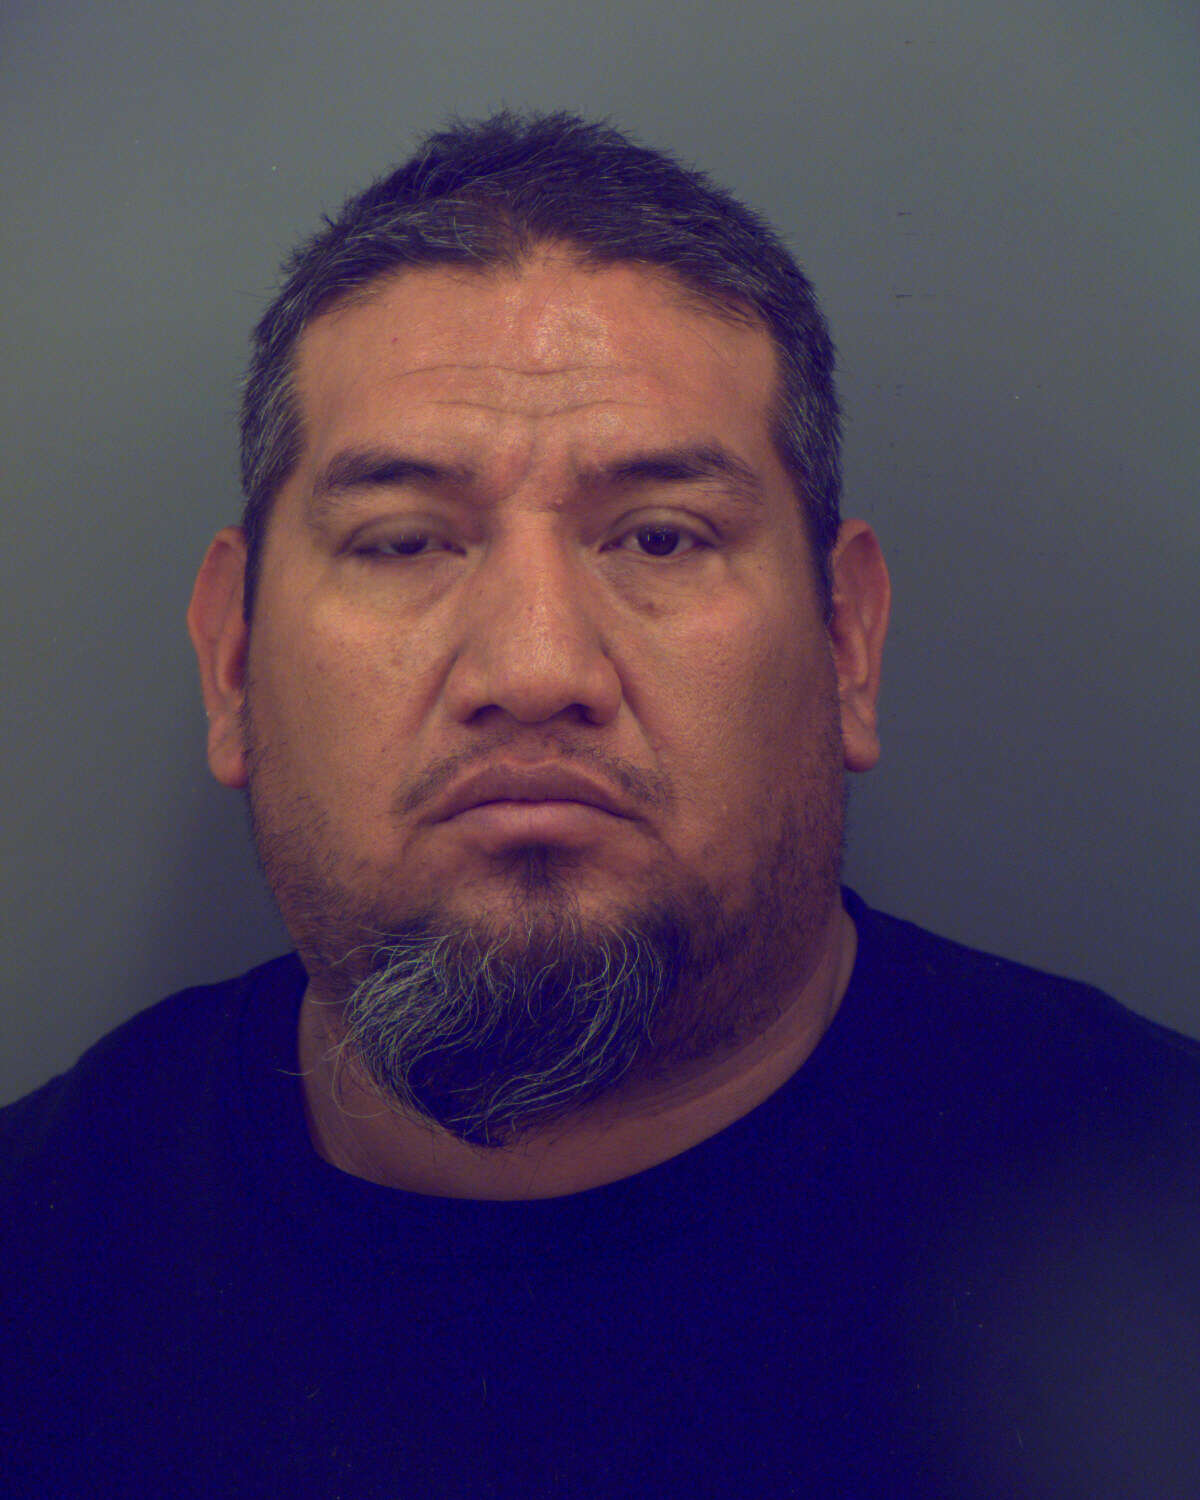 Alejandro Jimenez, 40, is a member of the "One" motorcycle club and was arrested Nov. 1, 2016 for engaging in organized criminal activity and aggravated robbery.